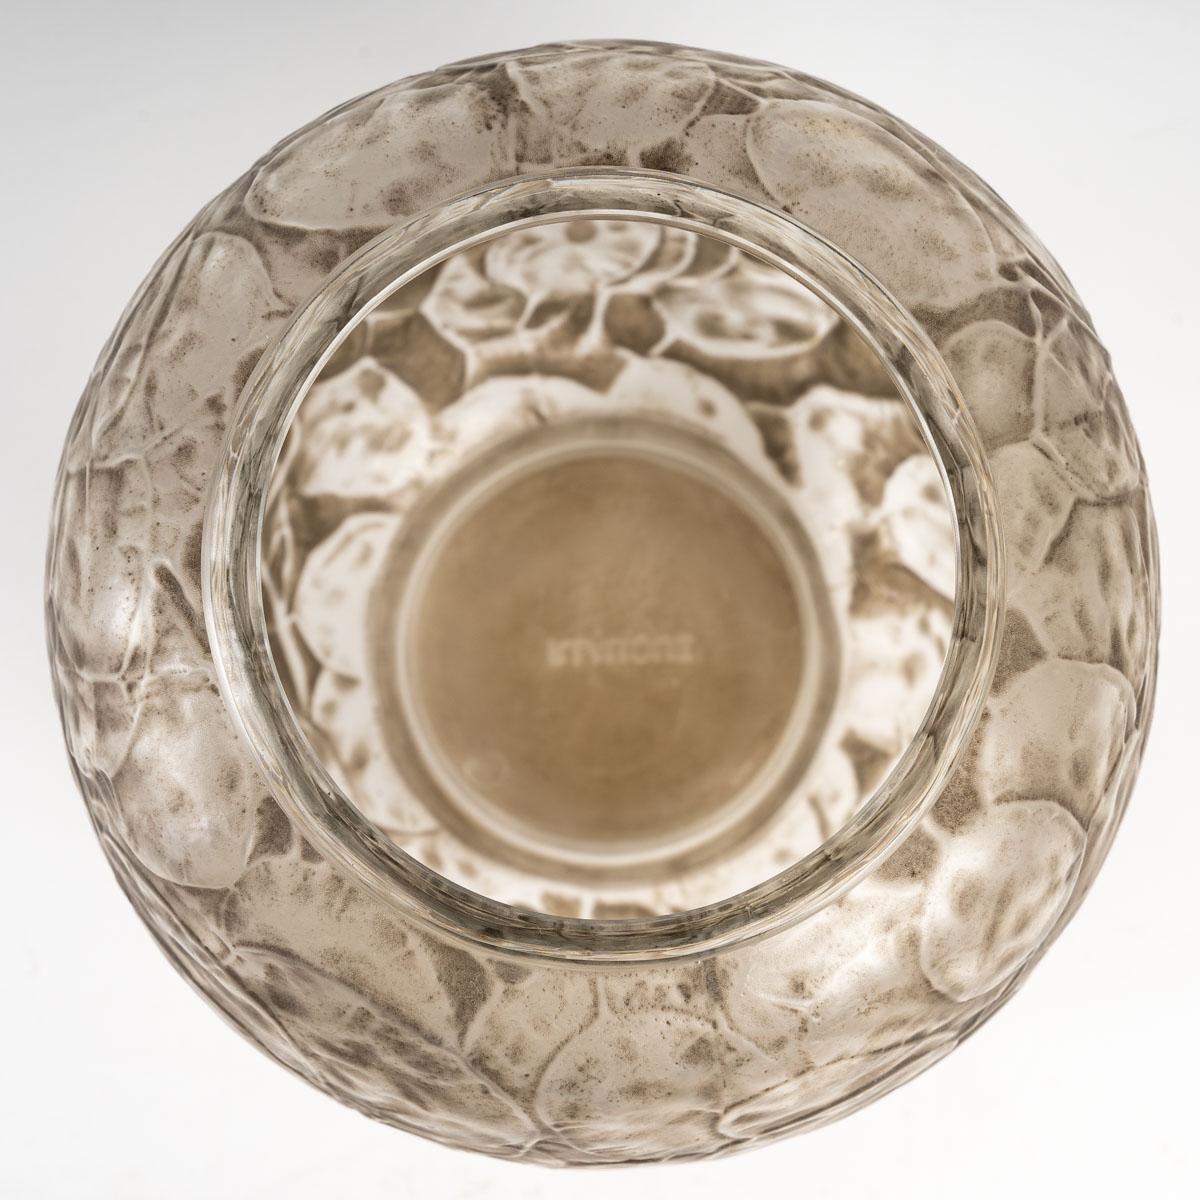 Molded 1914 René Lalique Monnaie du Pape Vase in Frosted Glass with Grey Patina